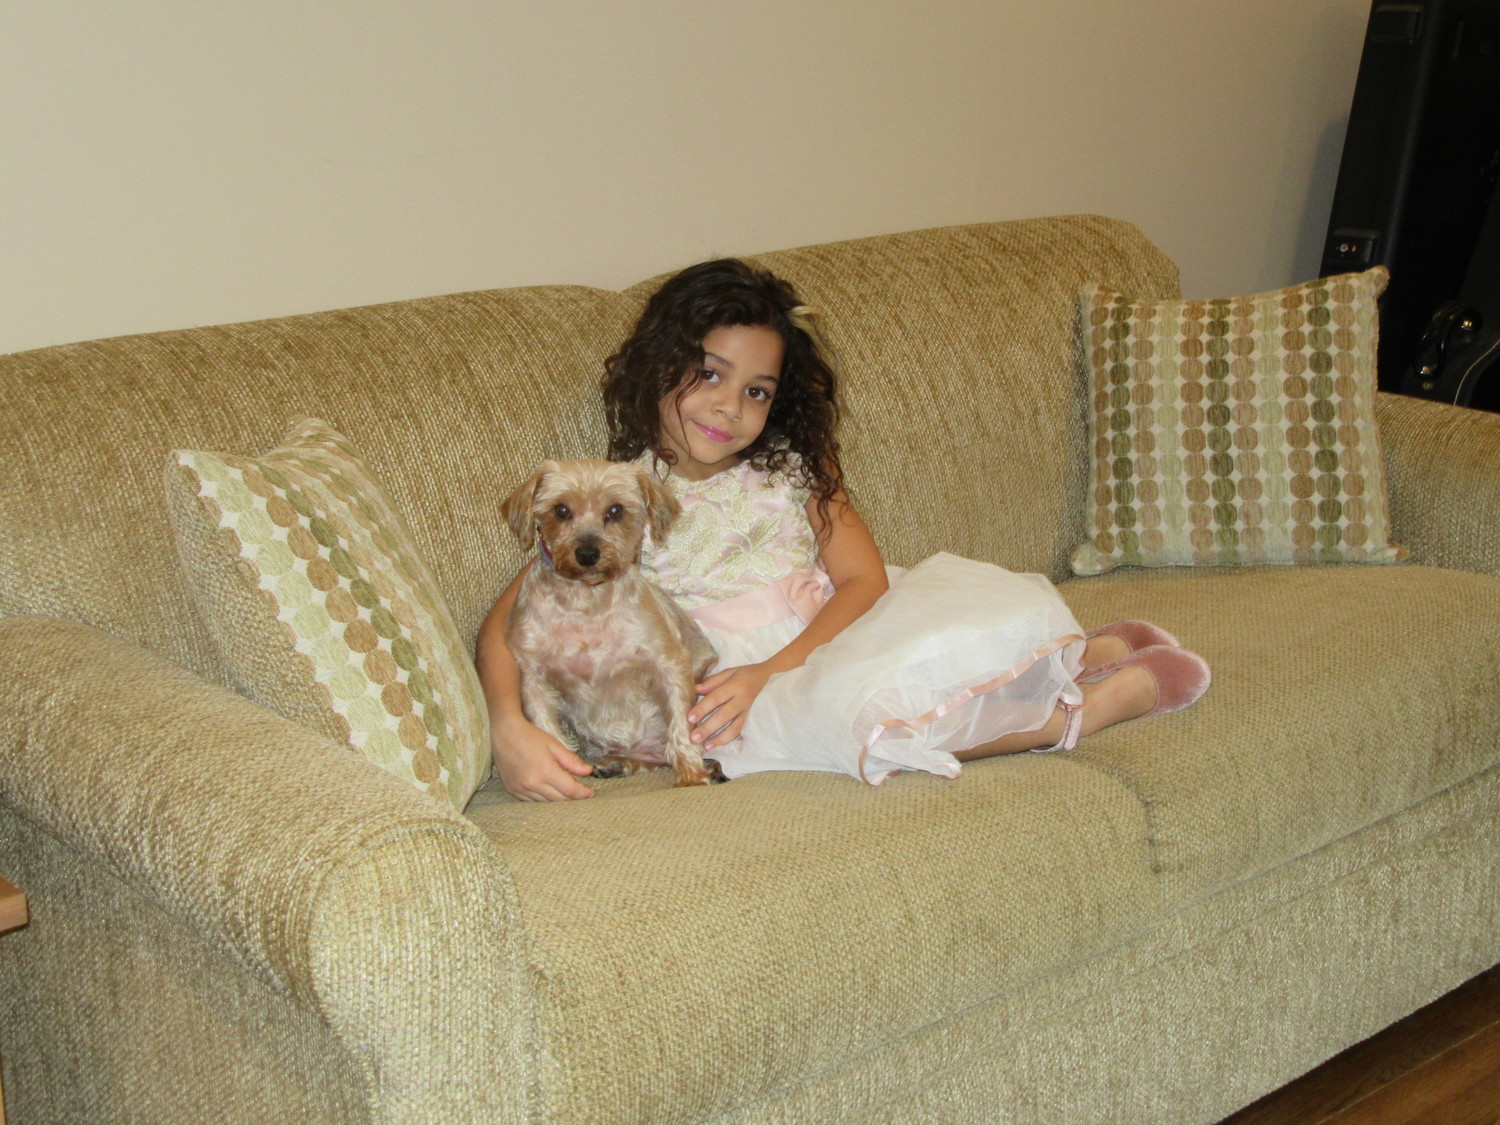 Sondra Toscano said her daughter, Lydia, and her furry best friend Venus are kindred spirits.